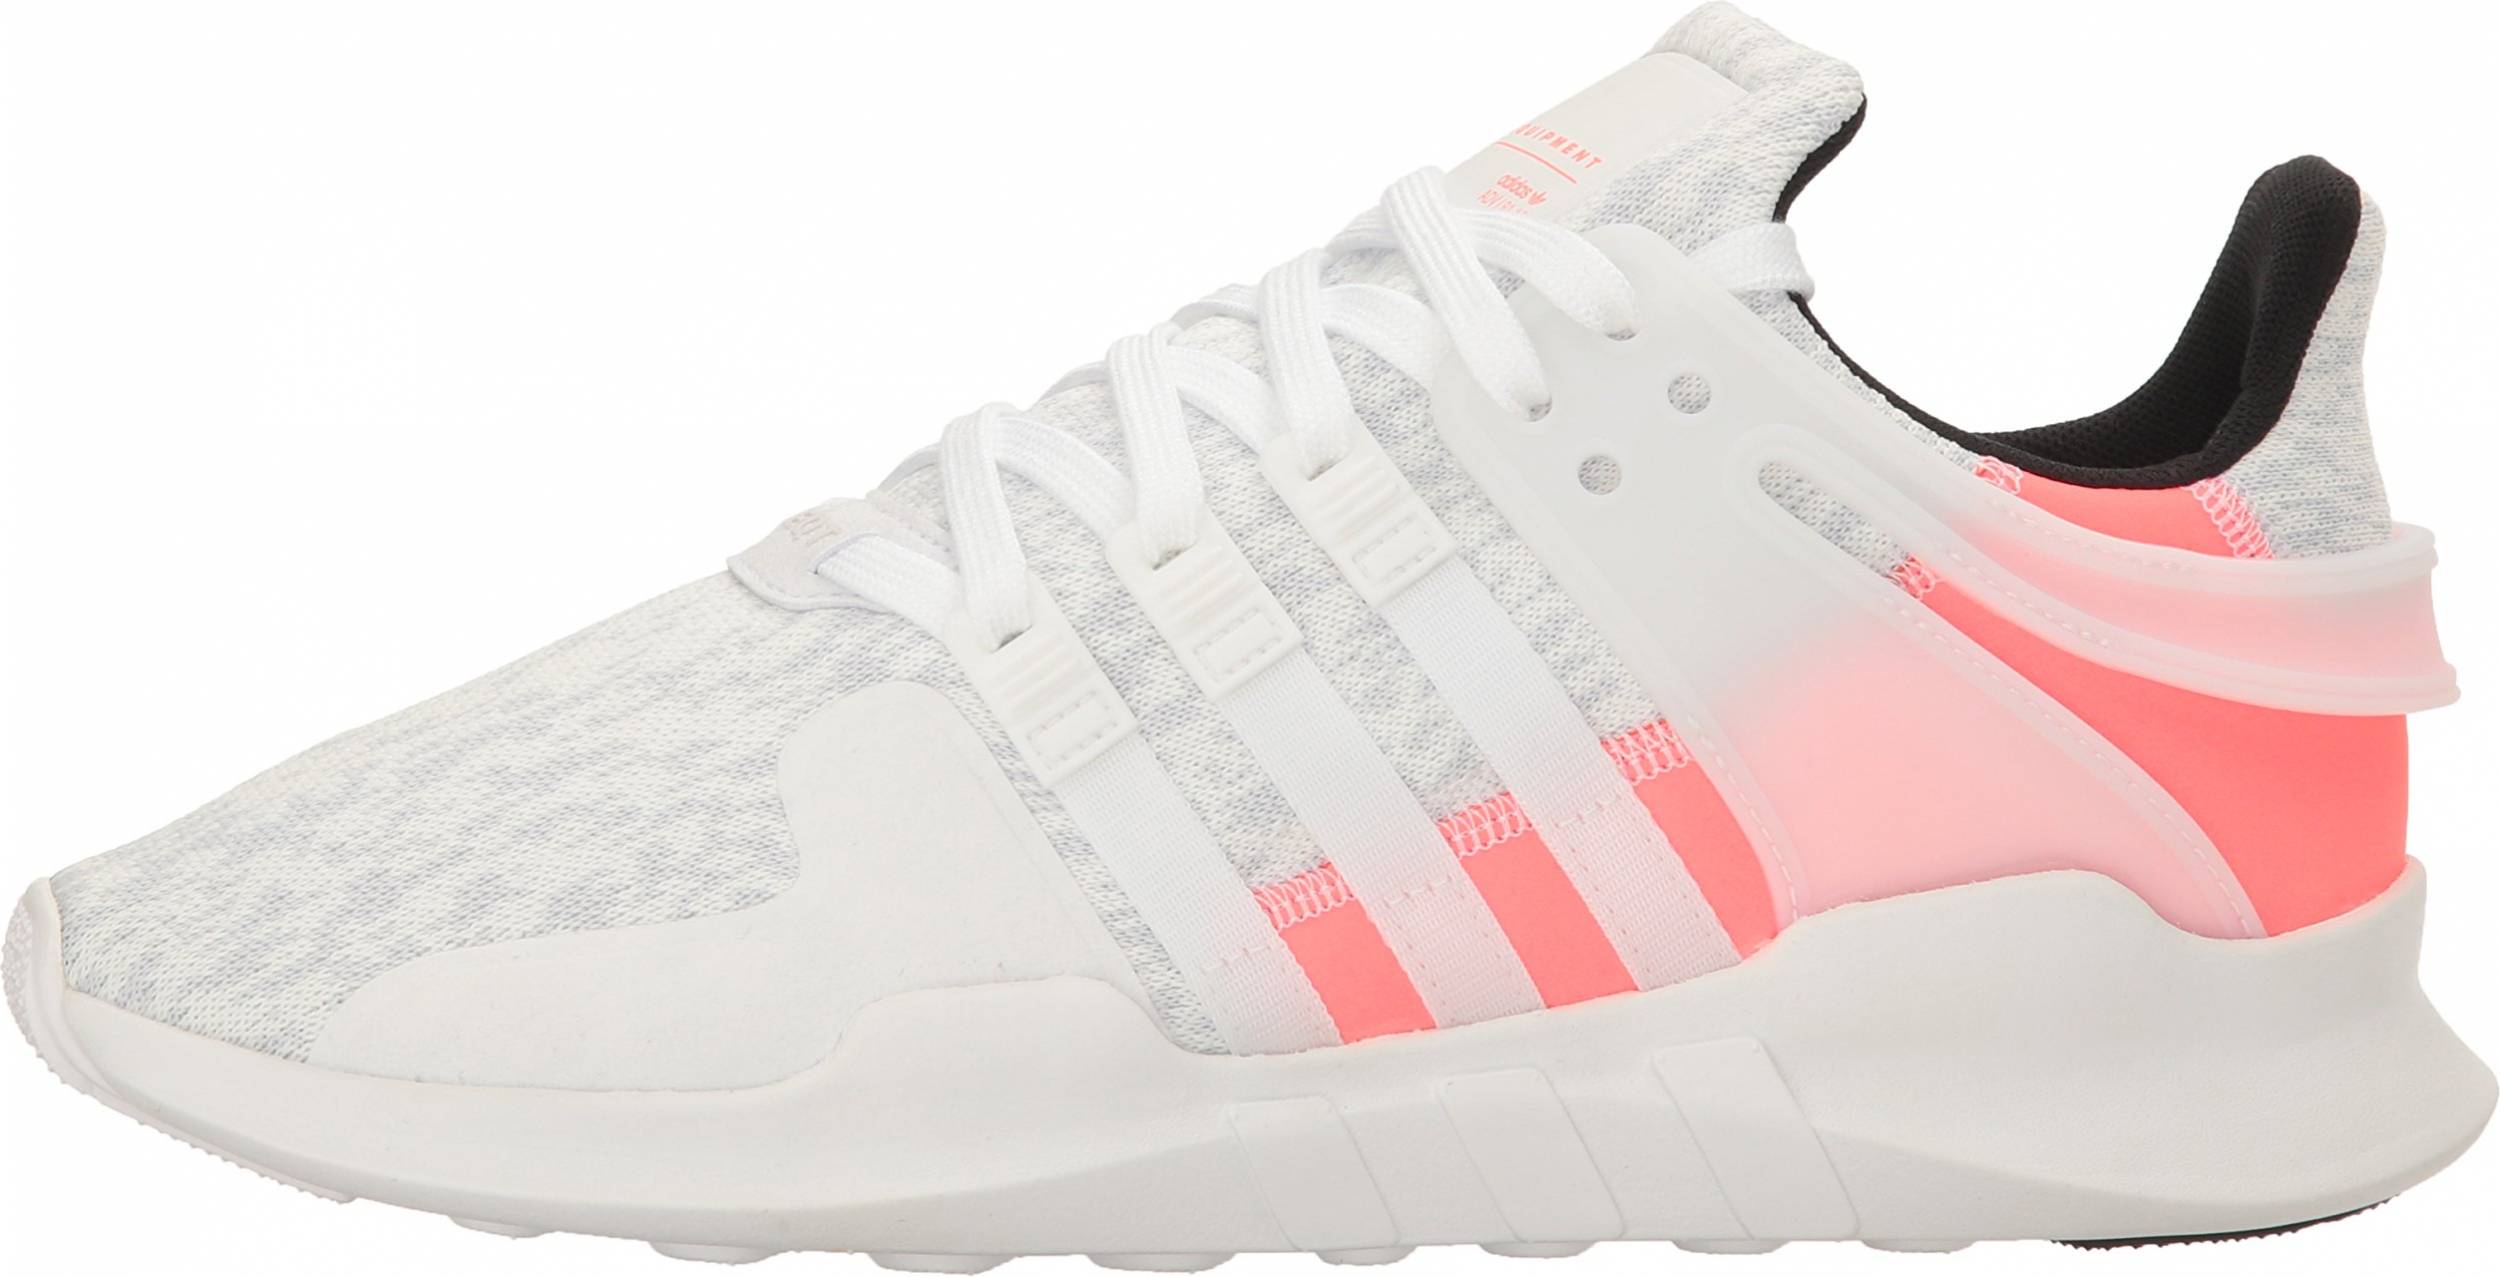 waitress blouse auction Adidas EQT Support ADV sneakers in 50+ colors (only $40) | RunRepeat